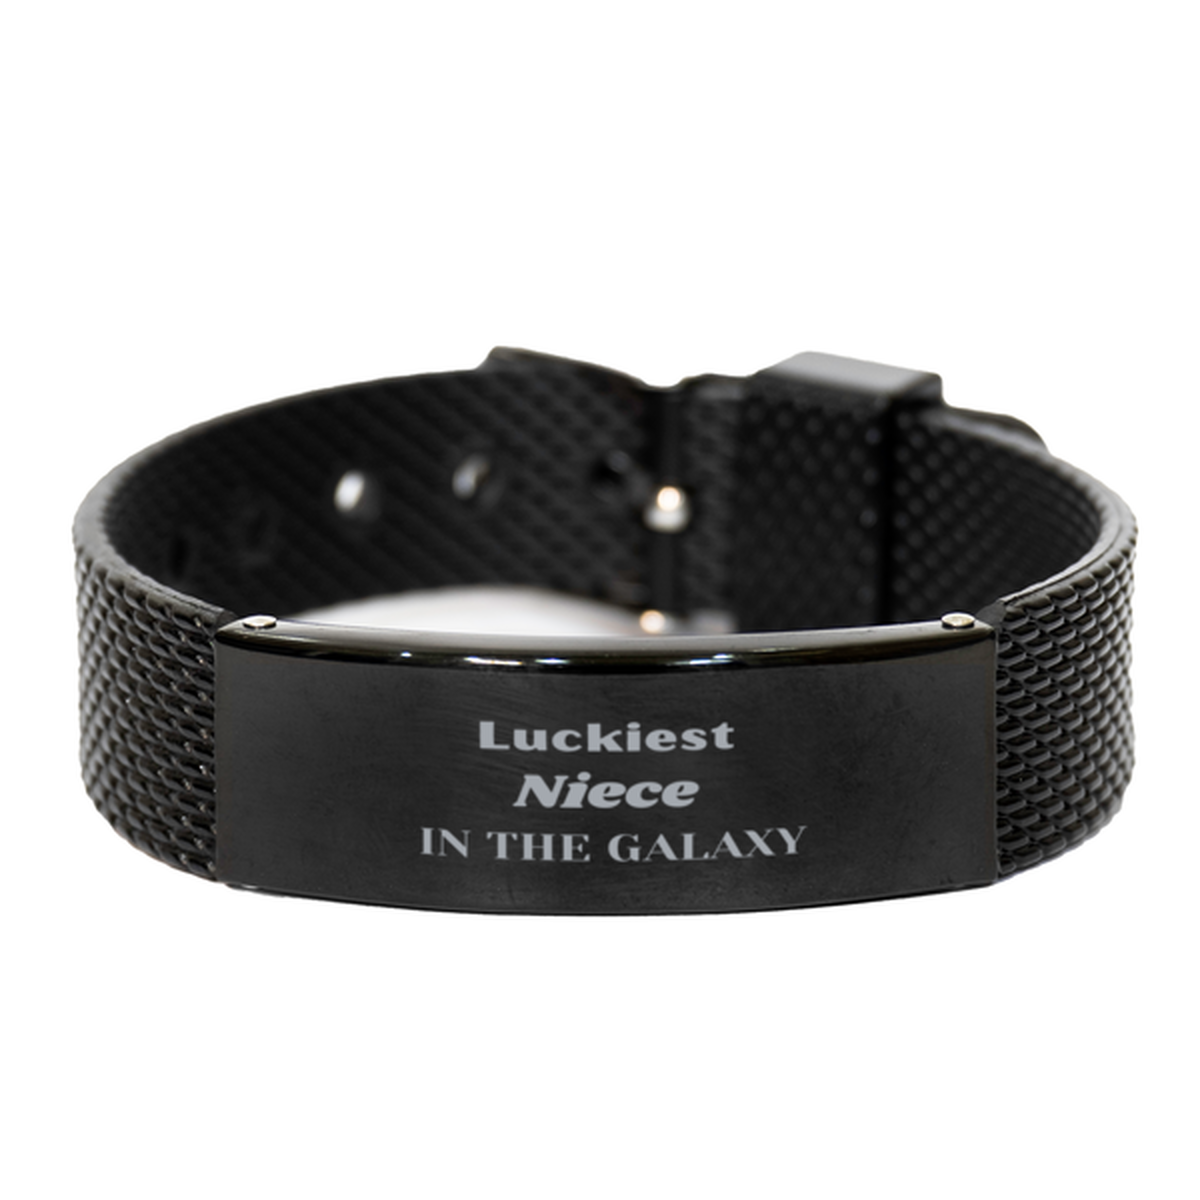 Luckiest Niece in the Galaxy, To My Niece Engraved Gifts, Christmas Niece Black Shark Mesh Bracelet Gifts, X-mas Birthday Unique Gifts For Niece Men Women